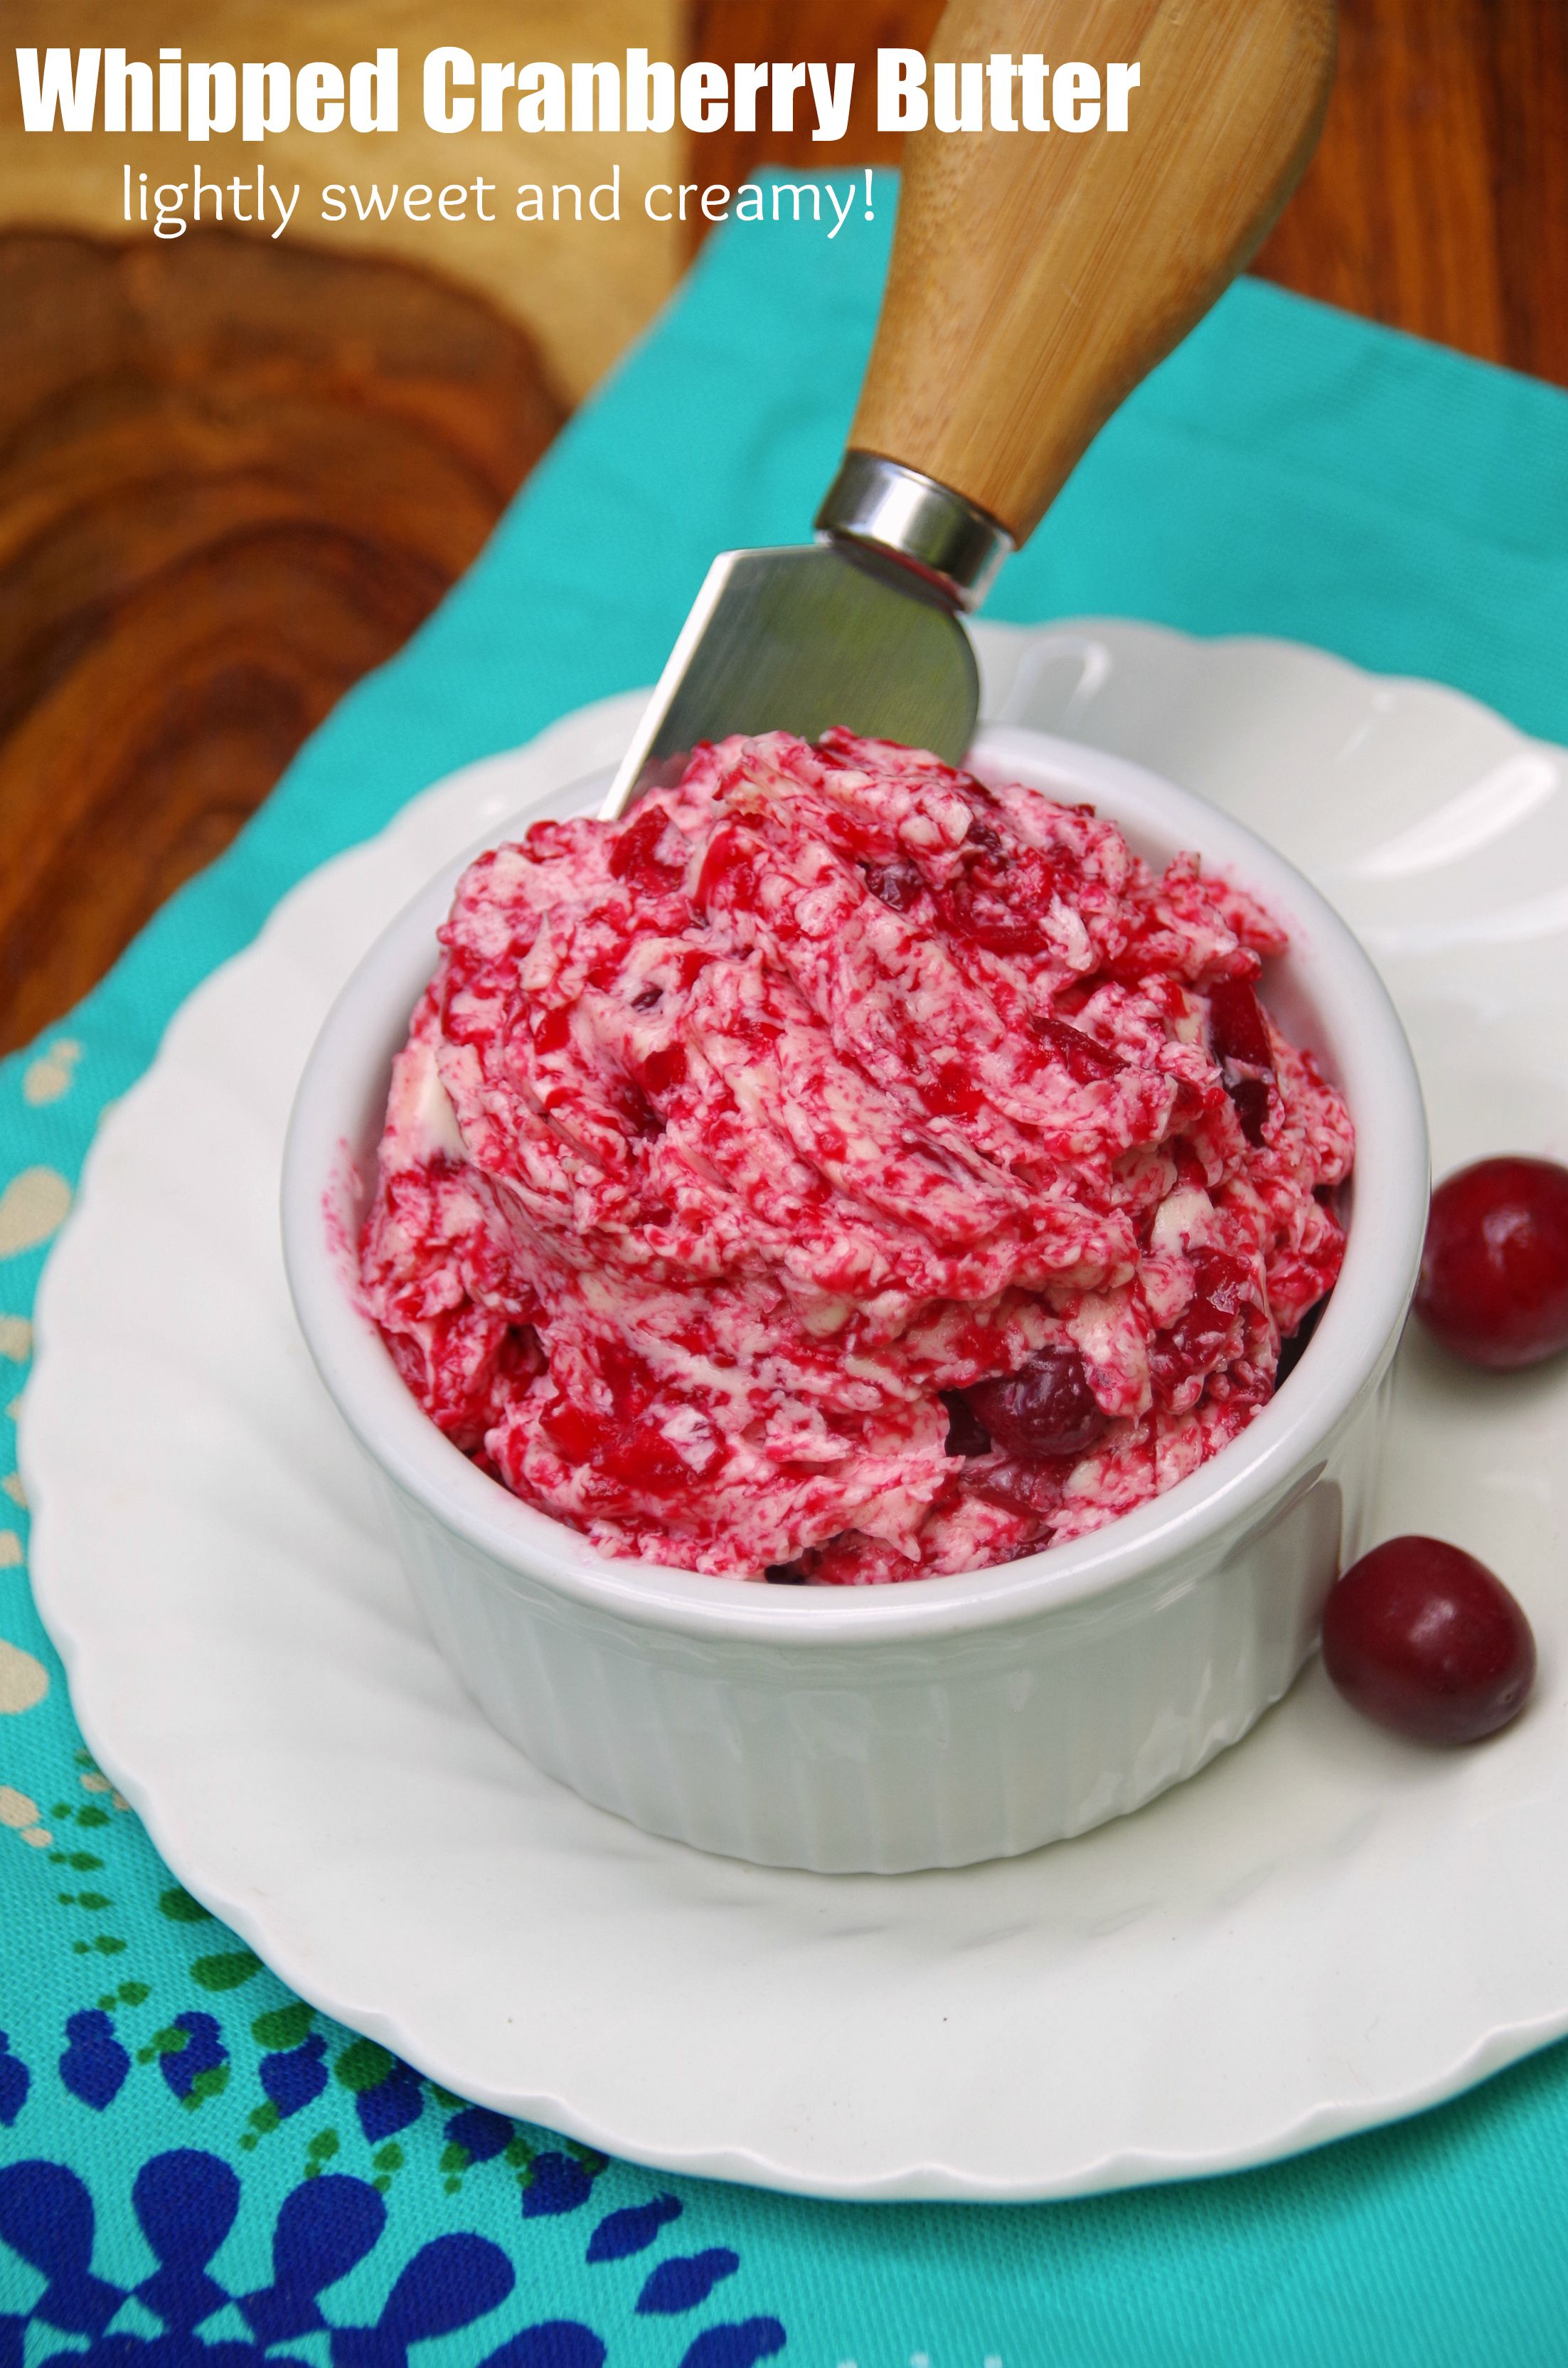 Whipped Cranberry Butter Recipe is an Easy and Delicious Cranberry Recipe